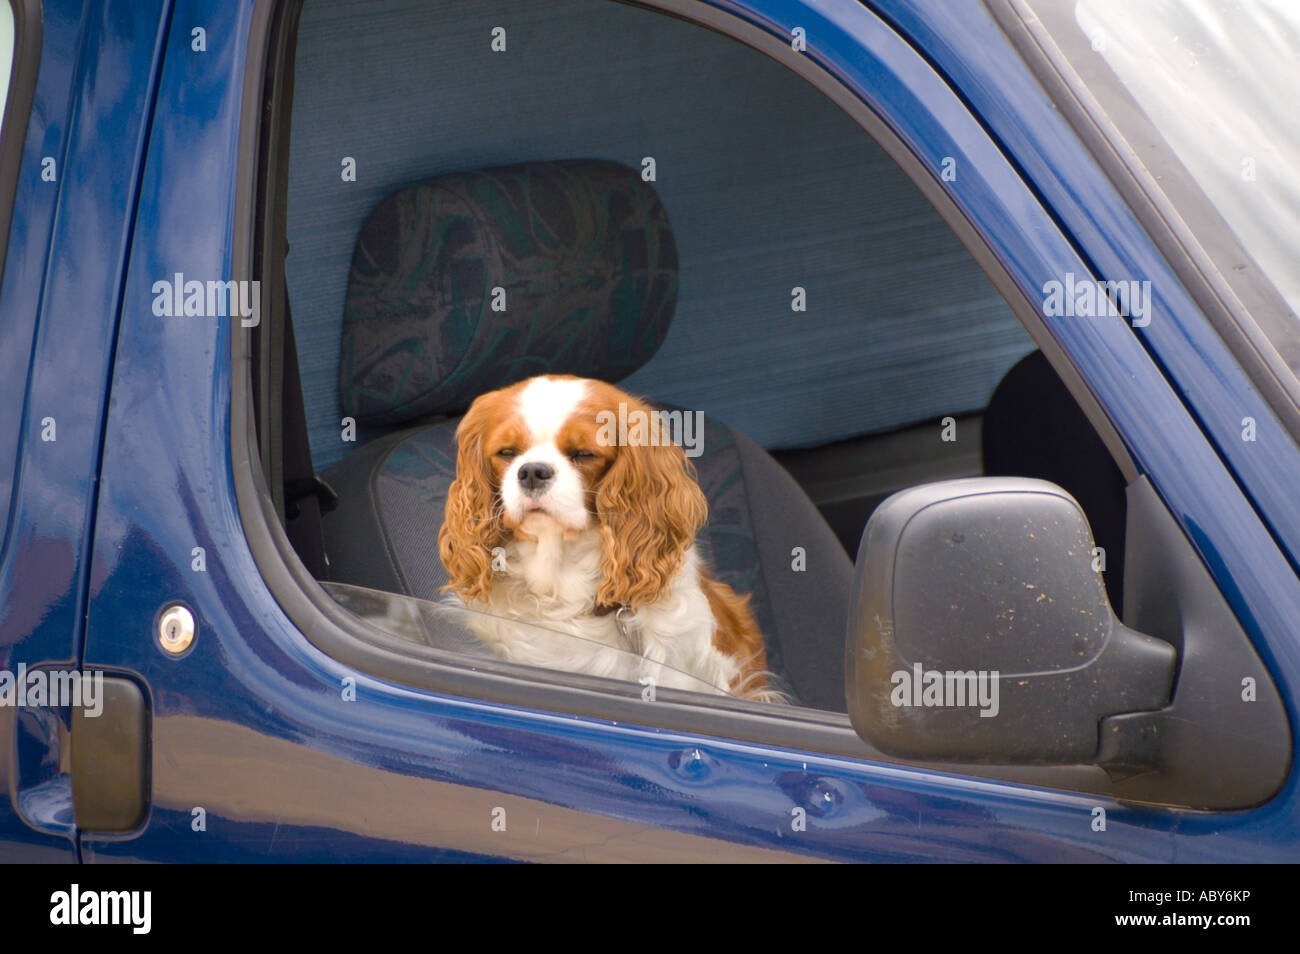 Dog in car with windows open on hot day south of France Stock Photo